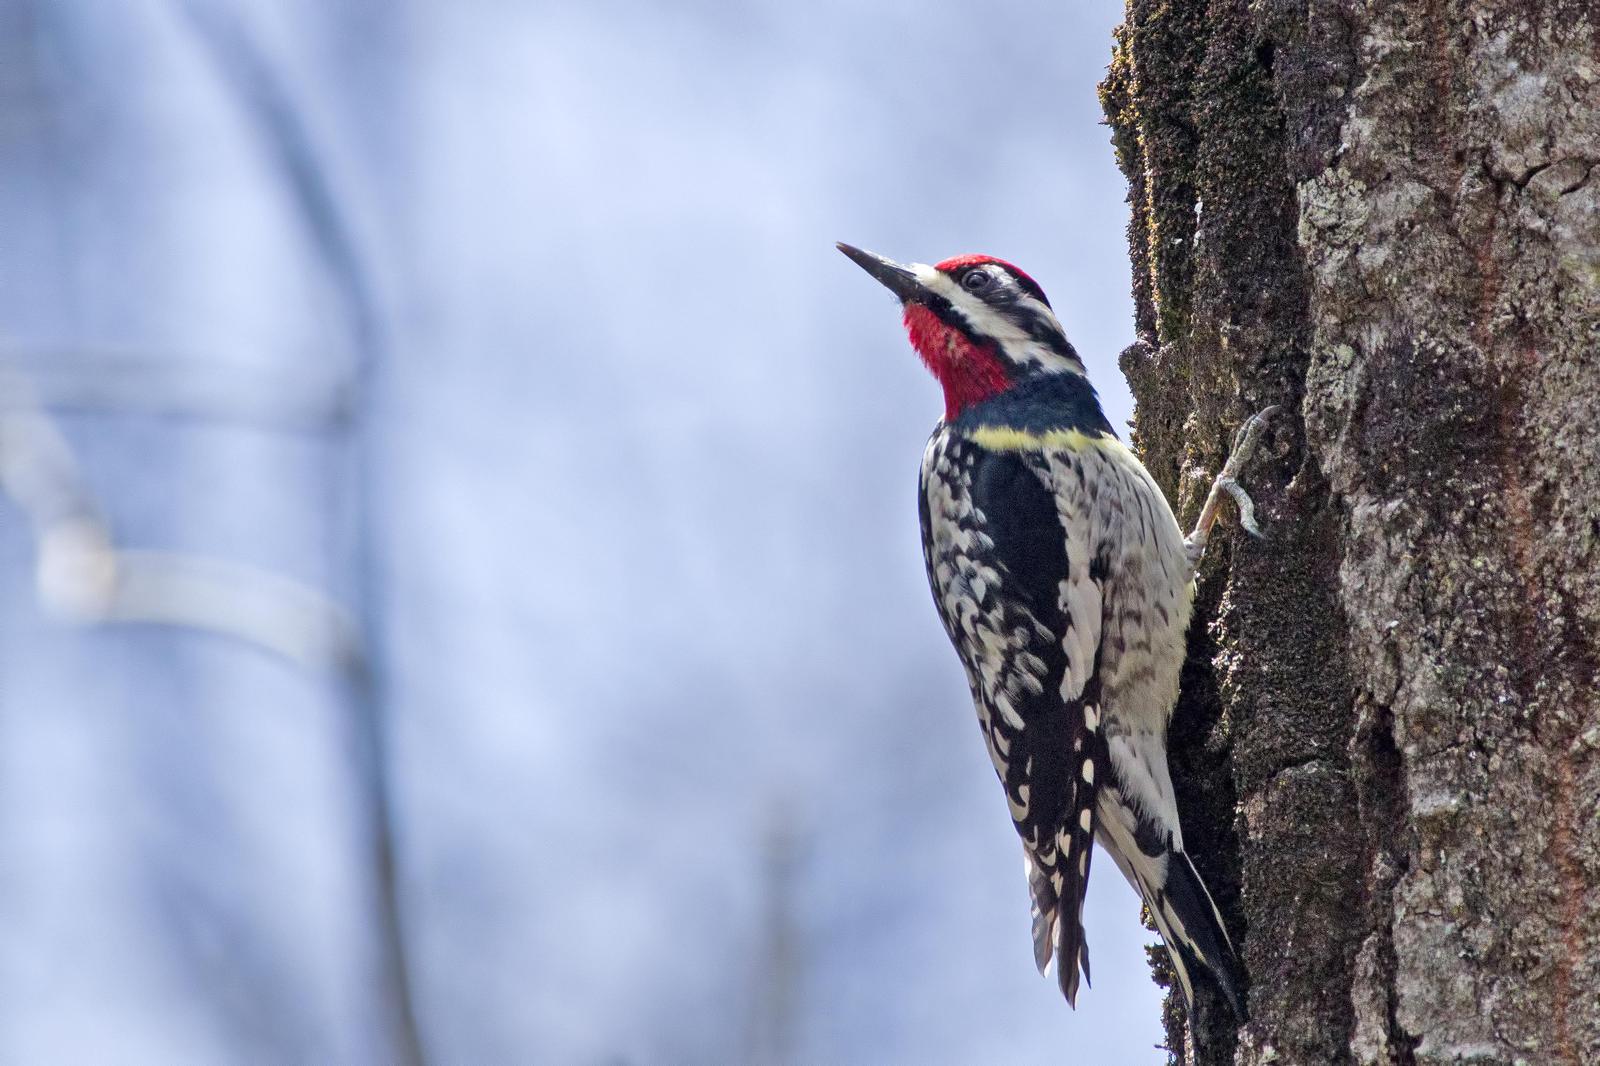 Yellow-bellied Sapsucker Photo by Rob Dickerson